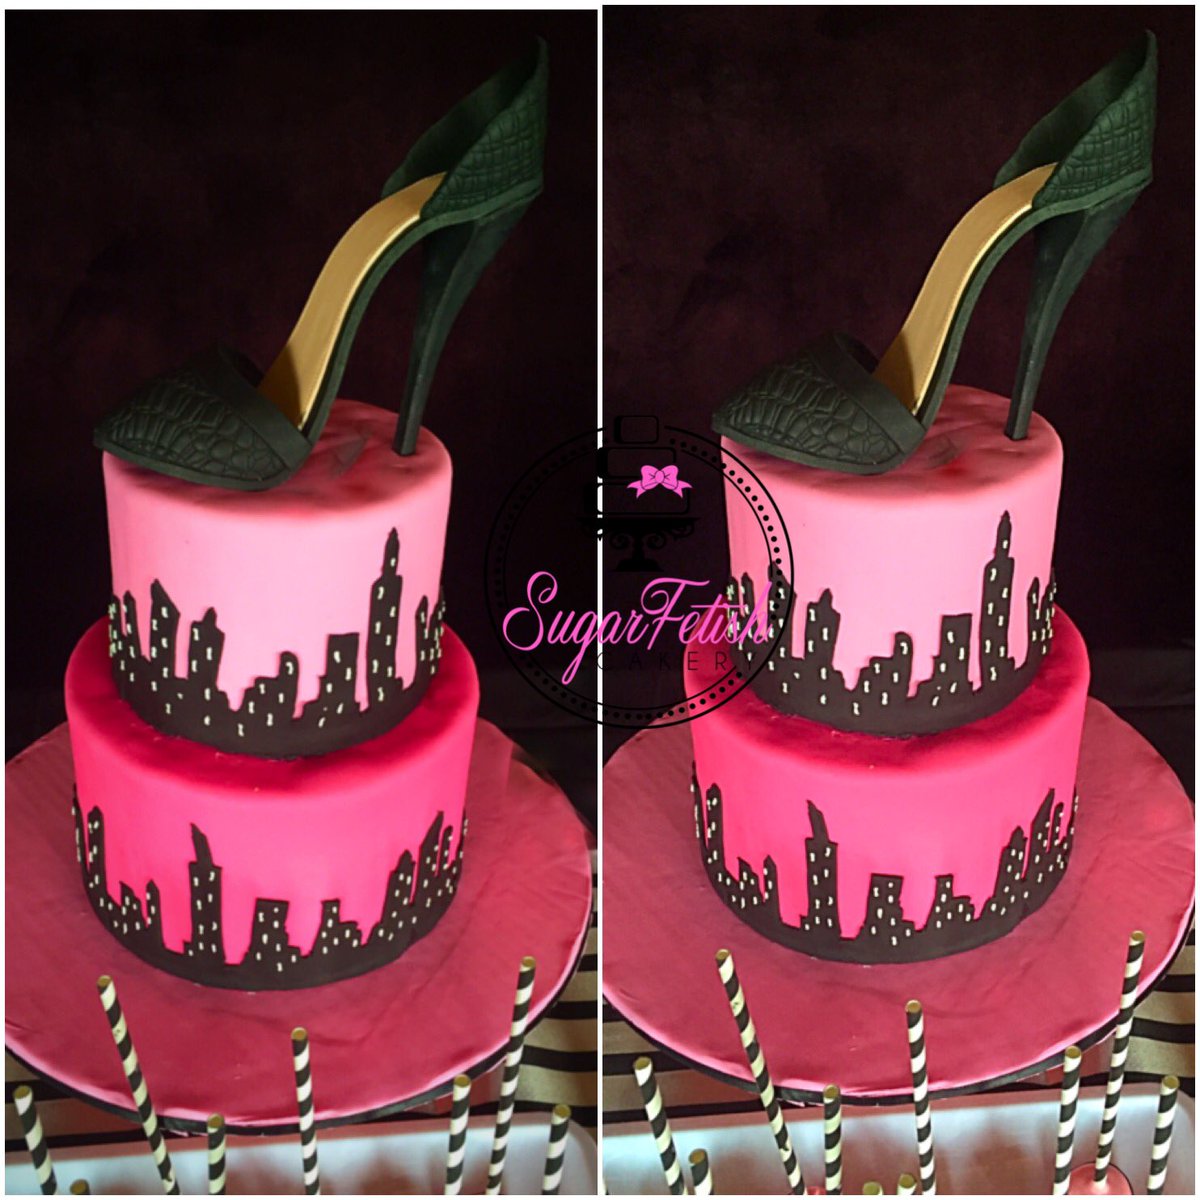 Sex and the city cakes